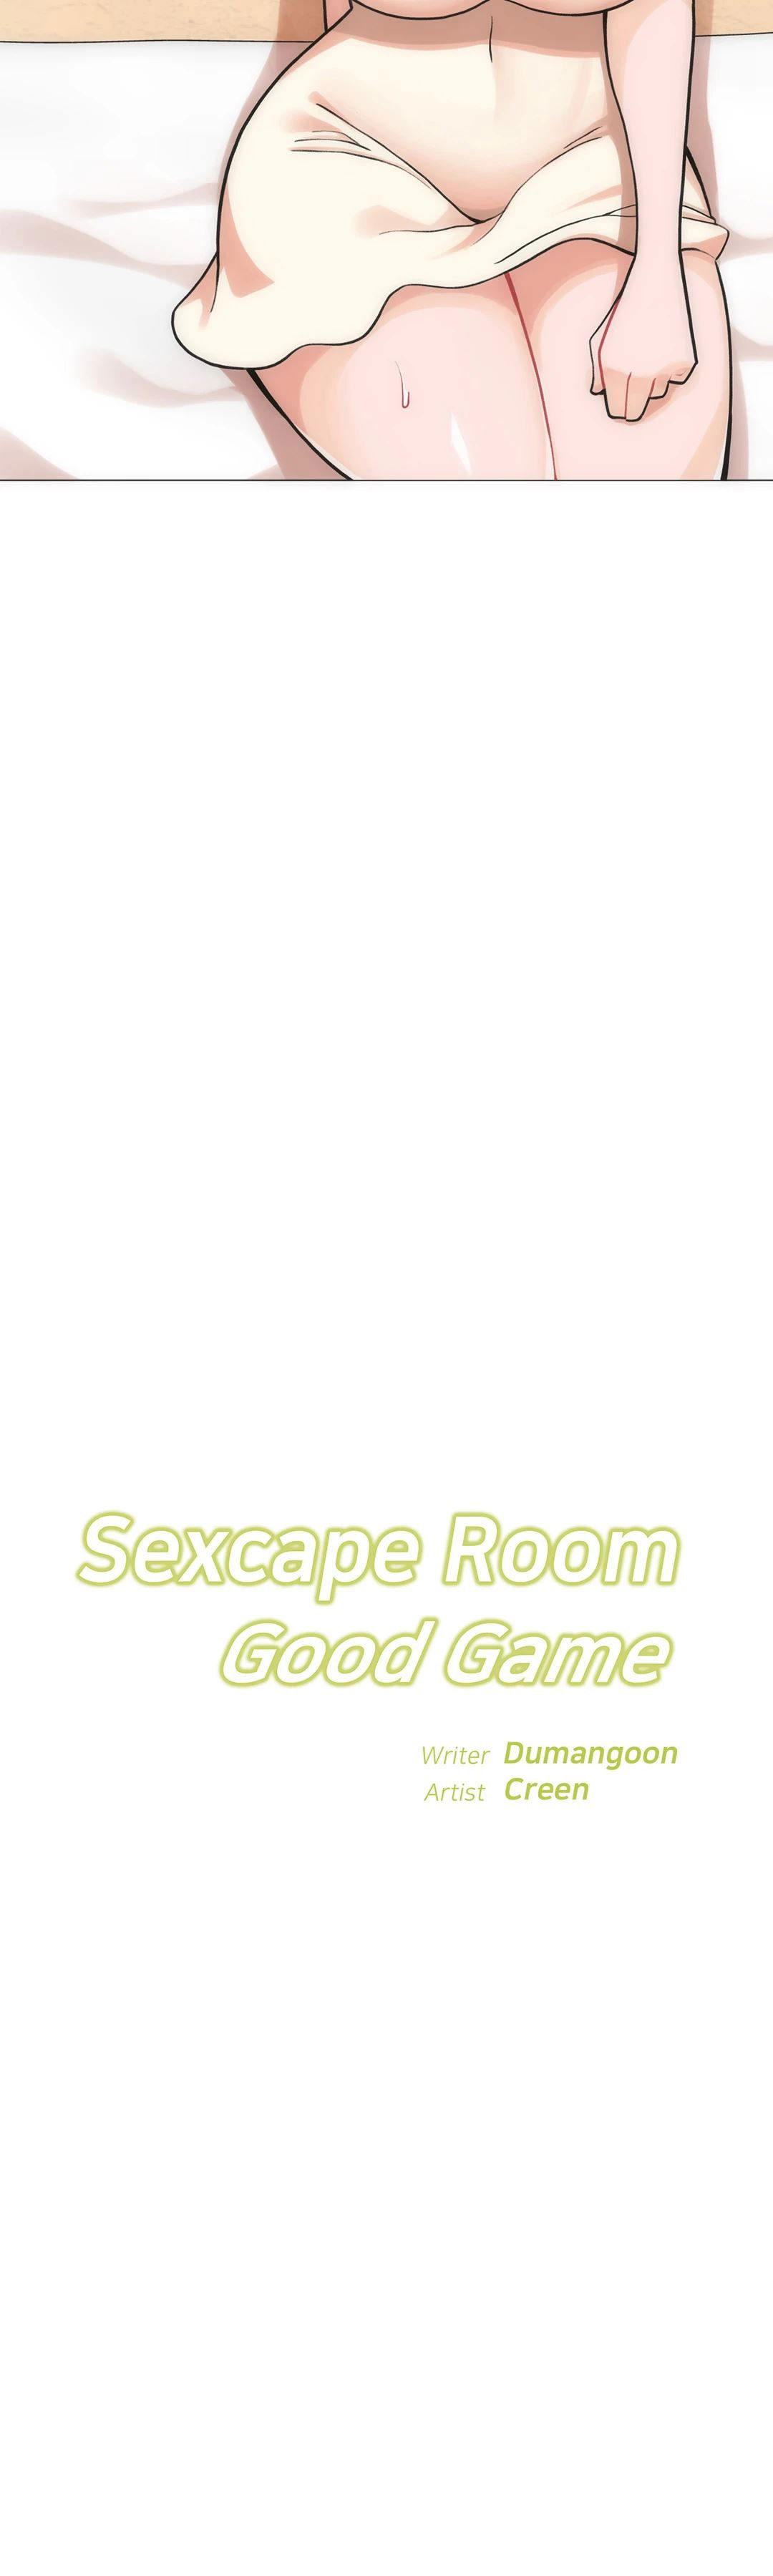 sexcape-room-good-game-chap-2-10